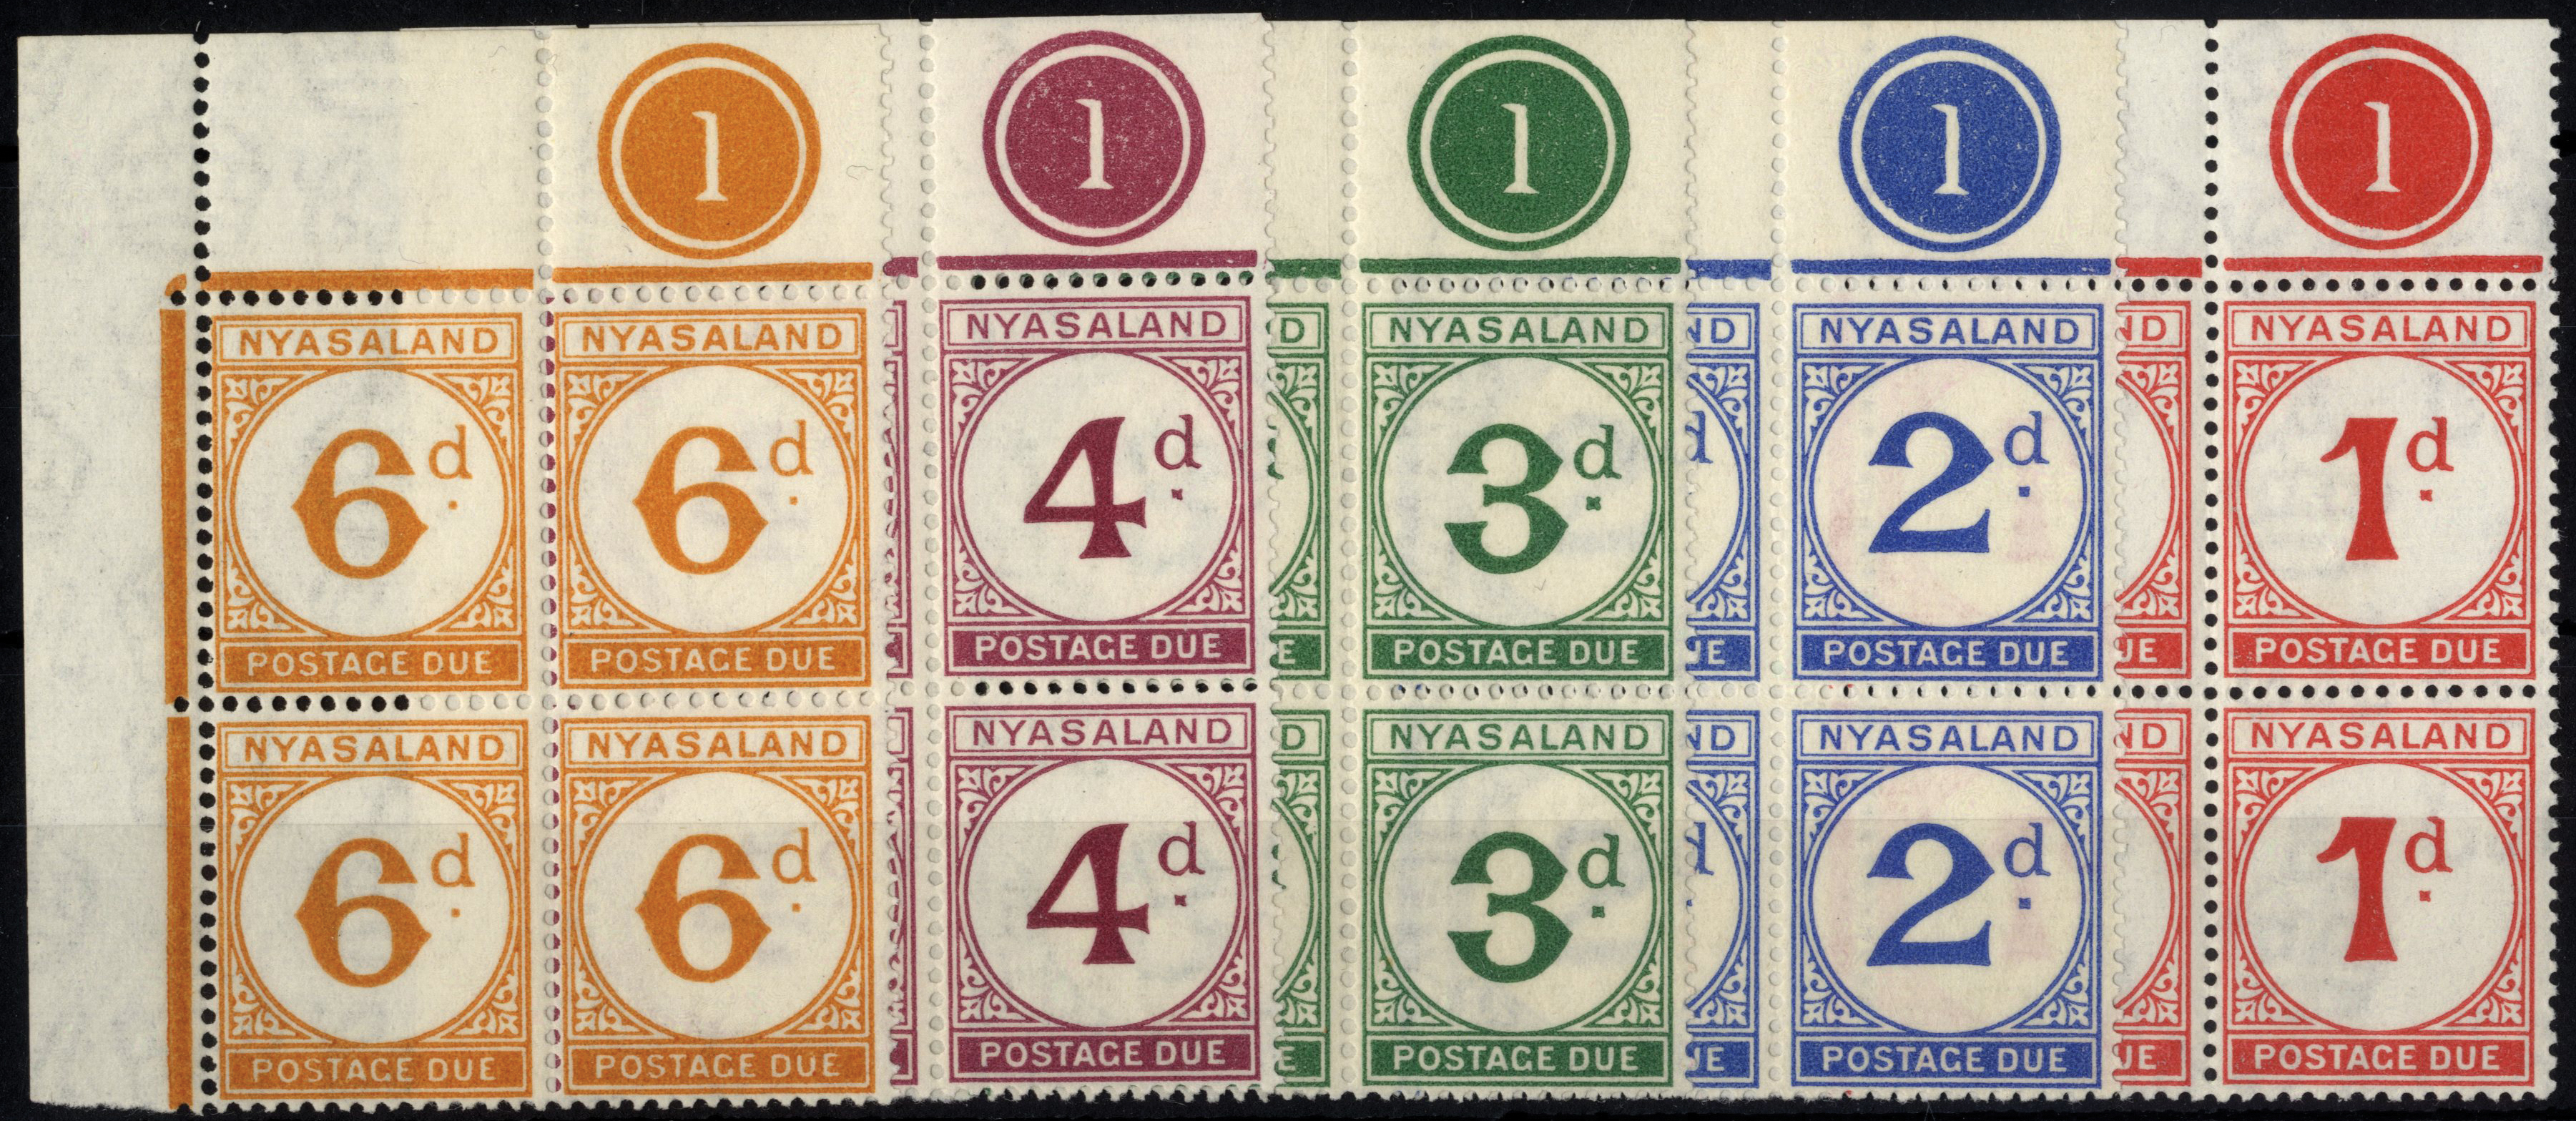 Nyasaland. 1950 Postage Due set of 4 in matching upper left Plate '1' blocks of 4, fresh unmounted